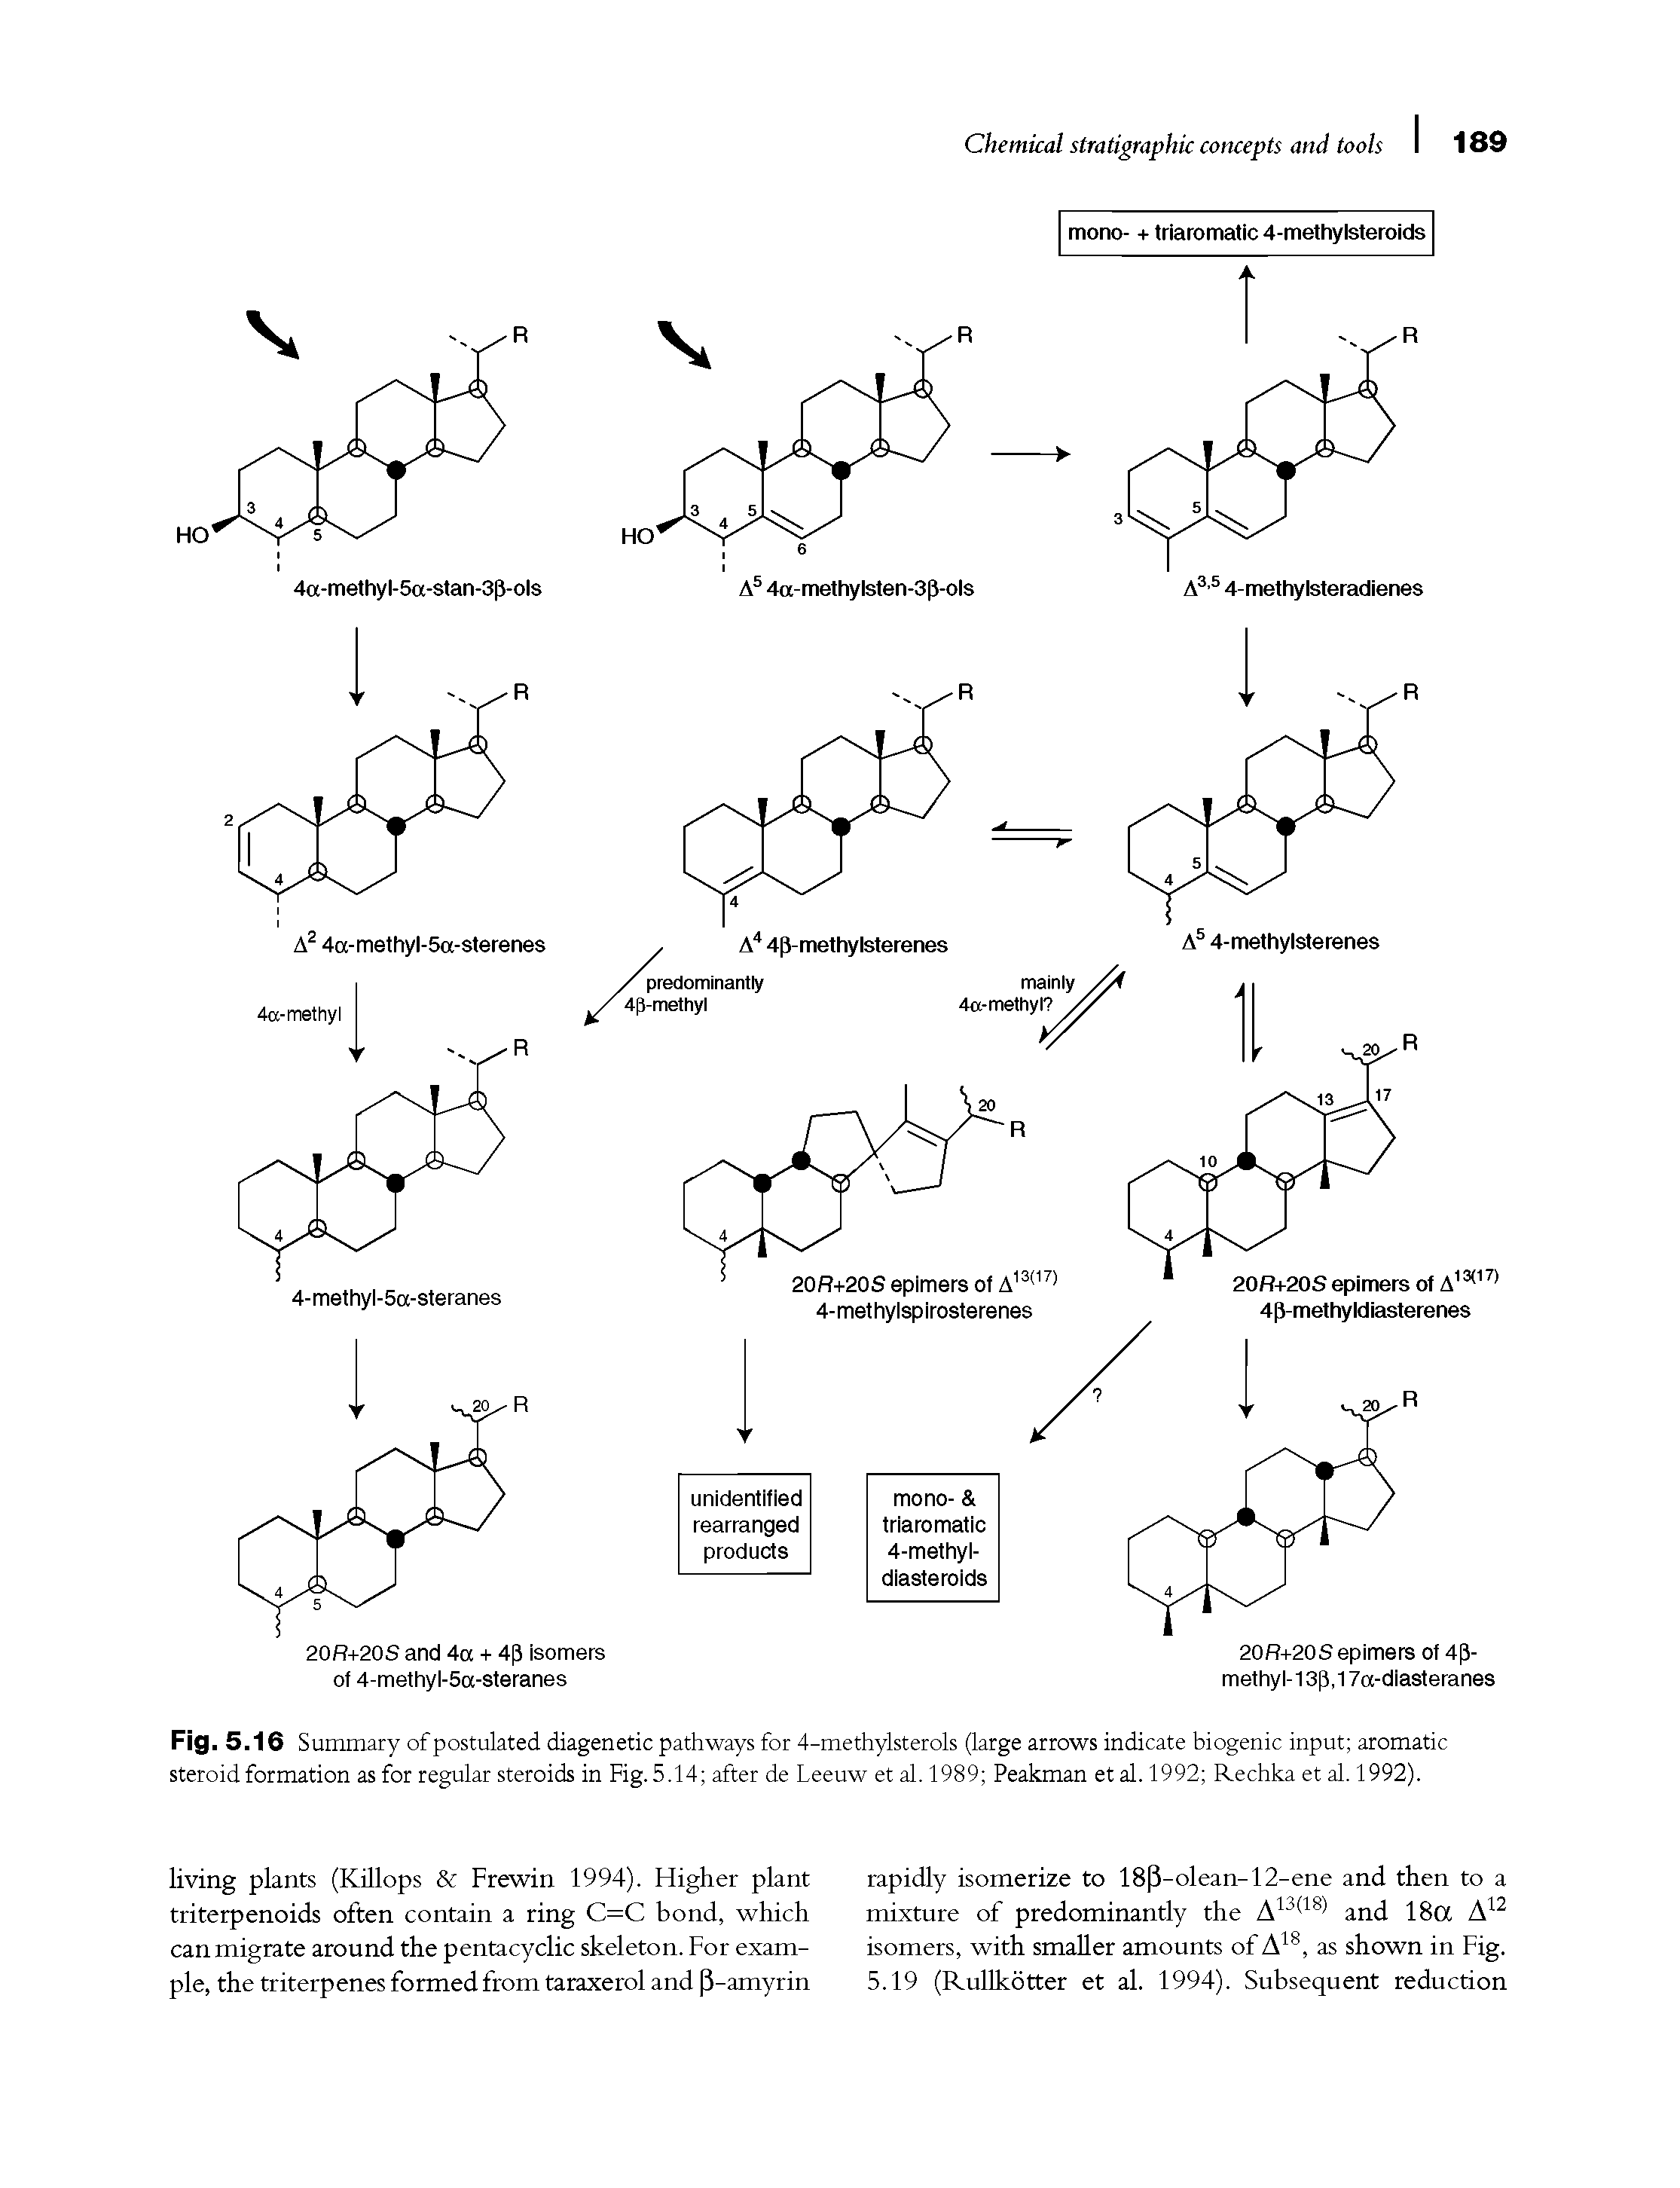 Fig. 5.16 Summary of postulated diagenetic pathways for 4-methylsterols (large arrows indicate biogenic input aromatic steroid formation as for regular steroids in Fig. 5.14 after de Leeuw et al. 1989 Peakman et al. 1992 Rechka et al. 1992).